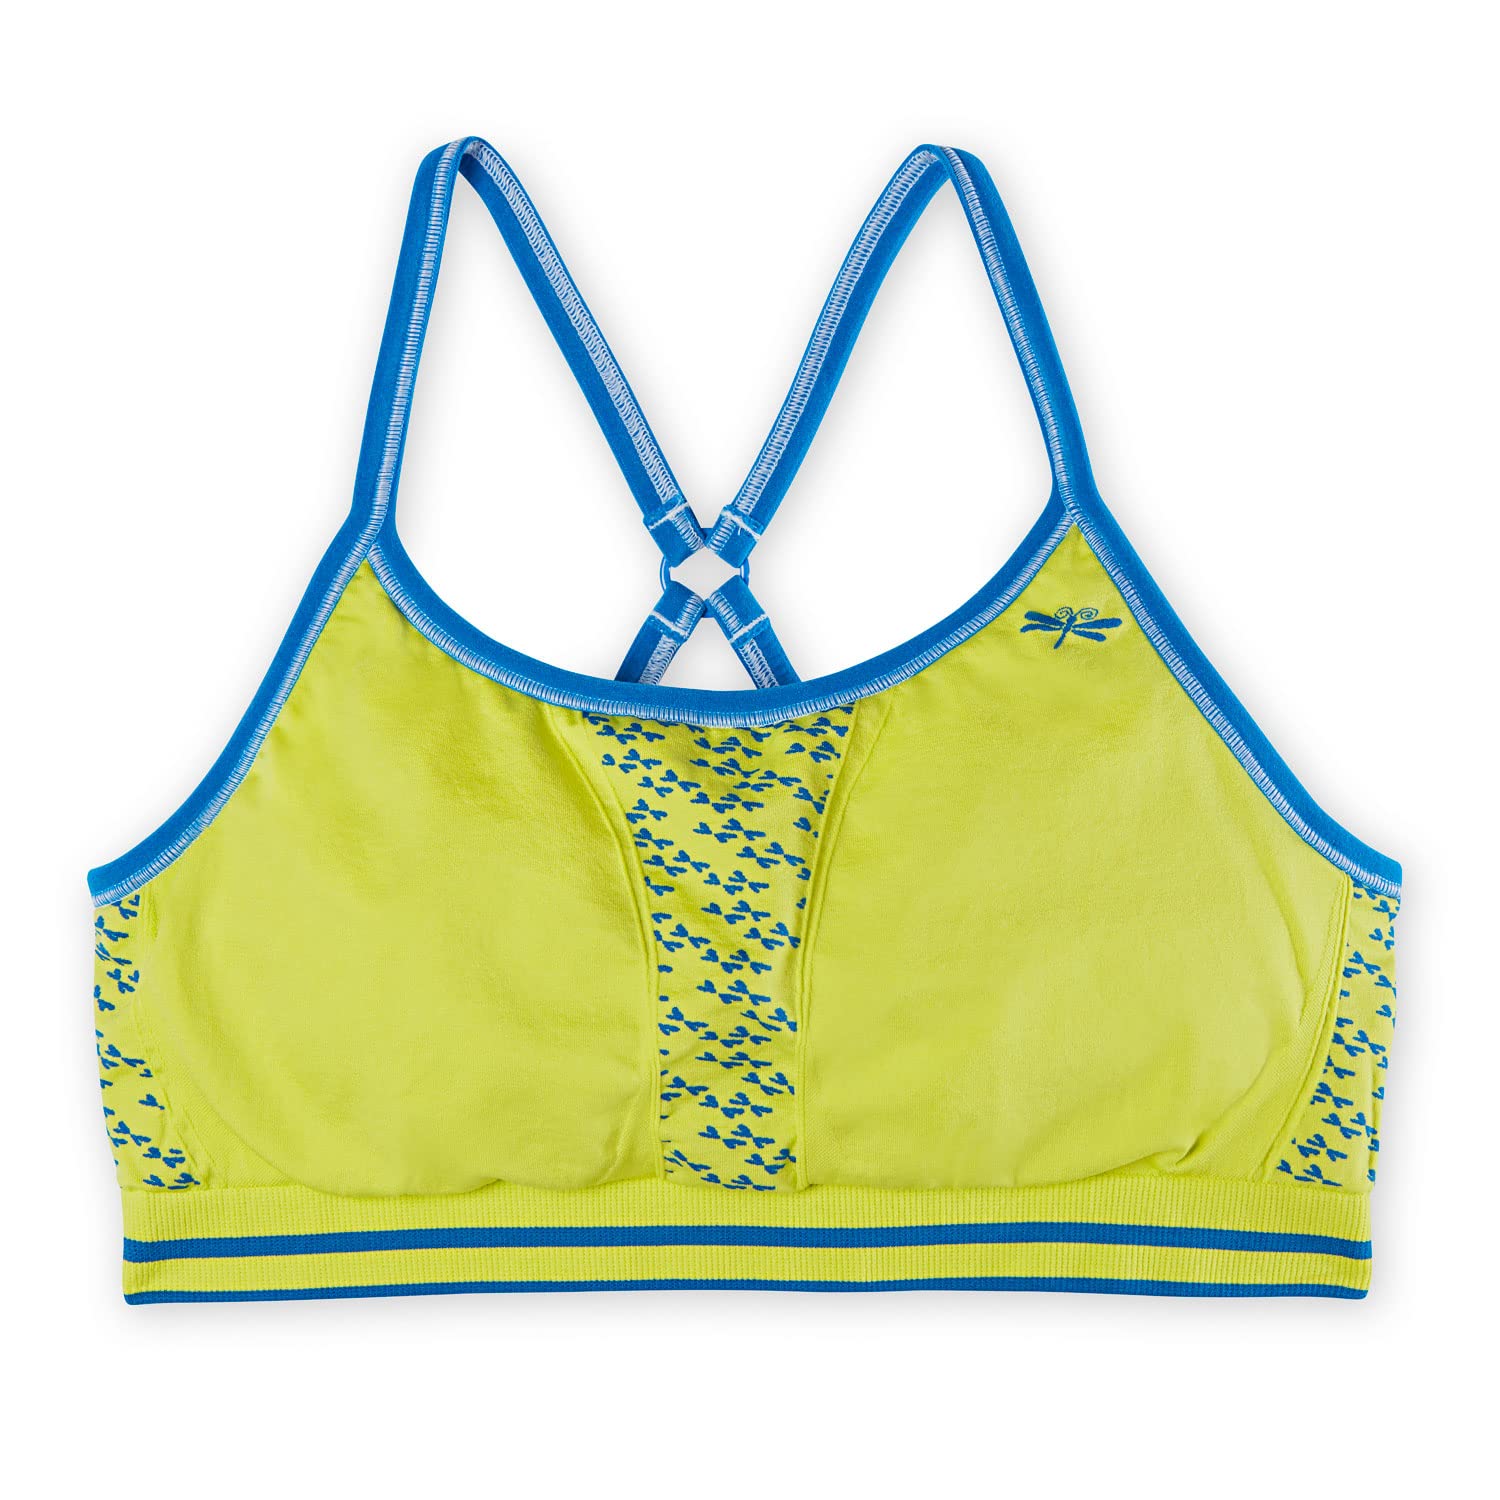 Mesh Racer Sports Bra (Tween and Teen Sports Bra, Racerback Style for High  Impact Activities) 12 Lime With Teal